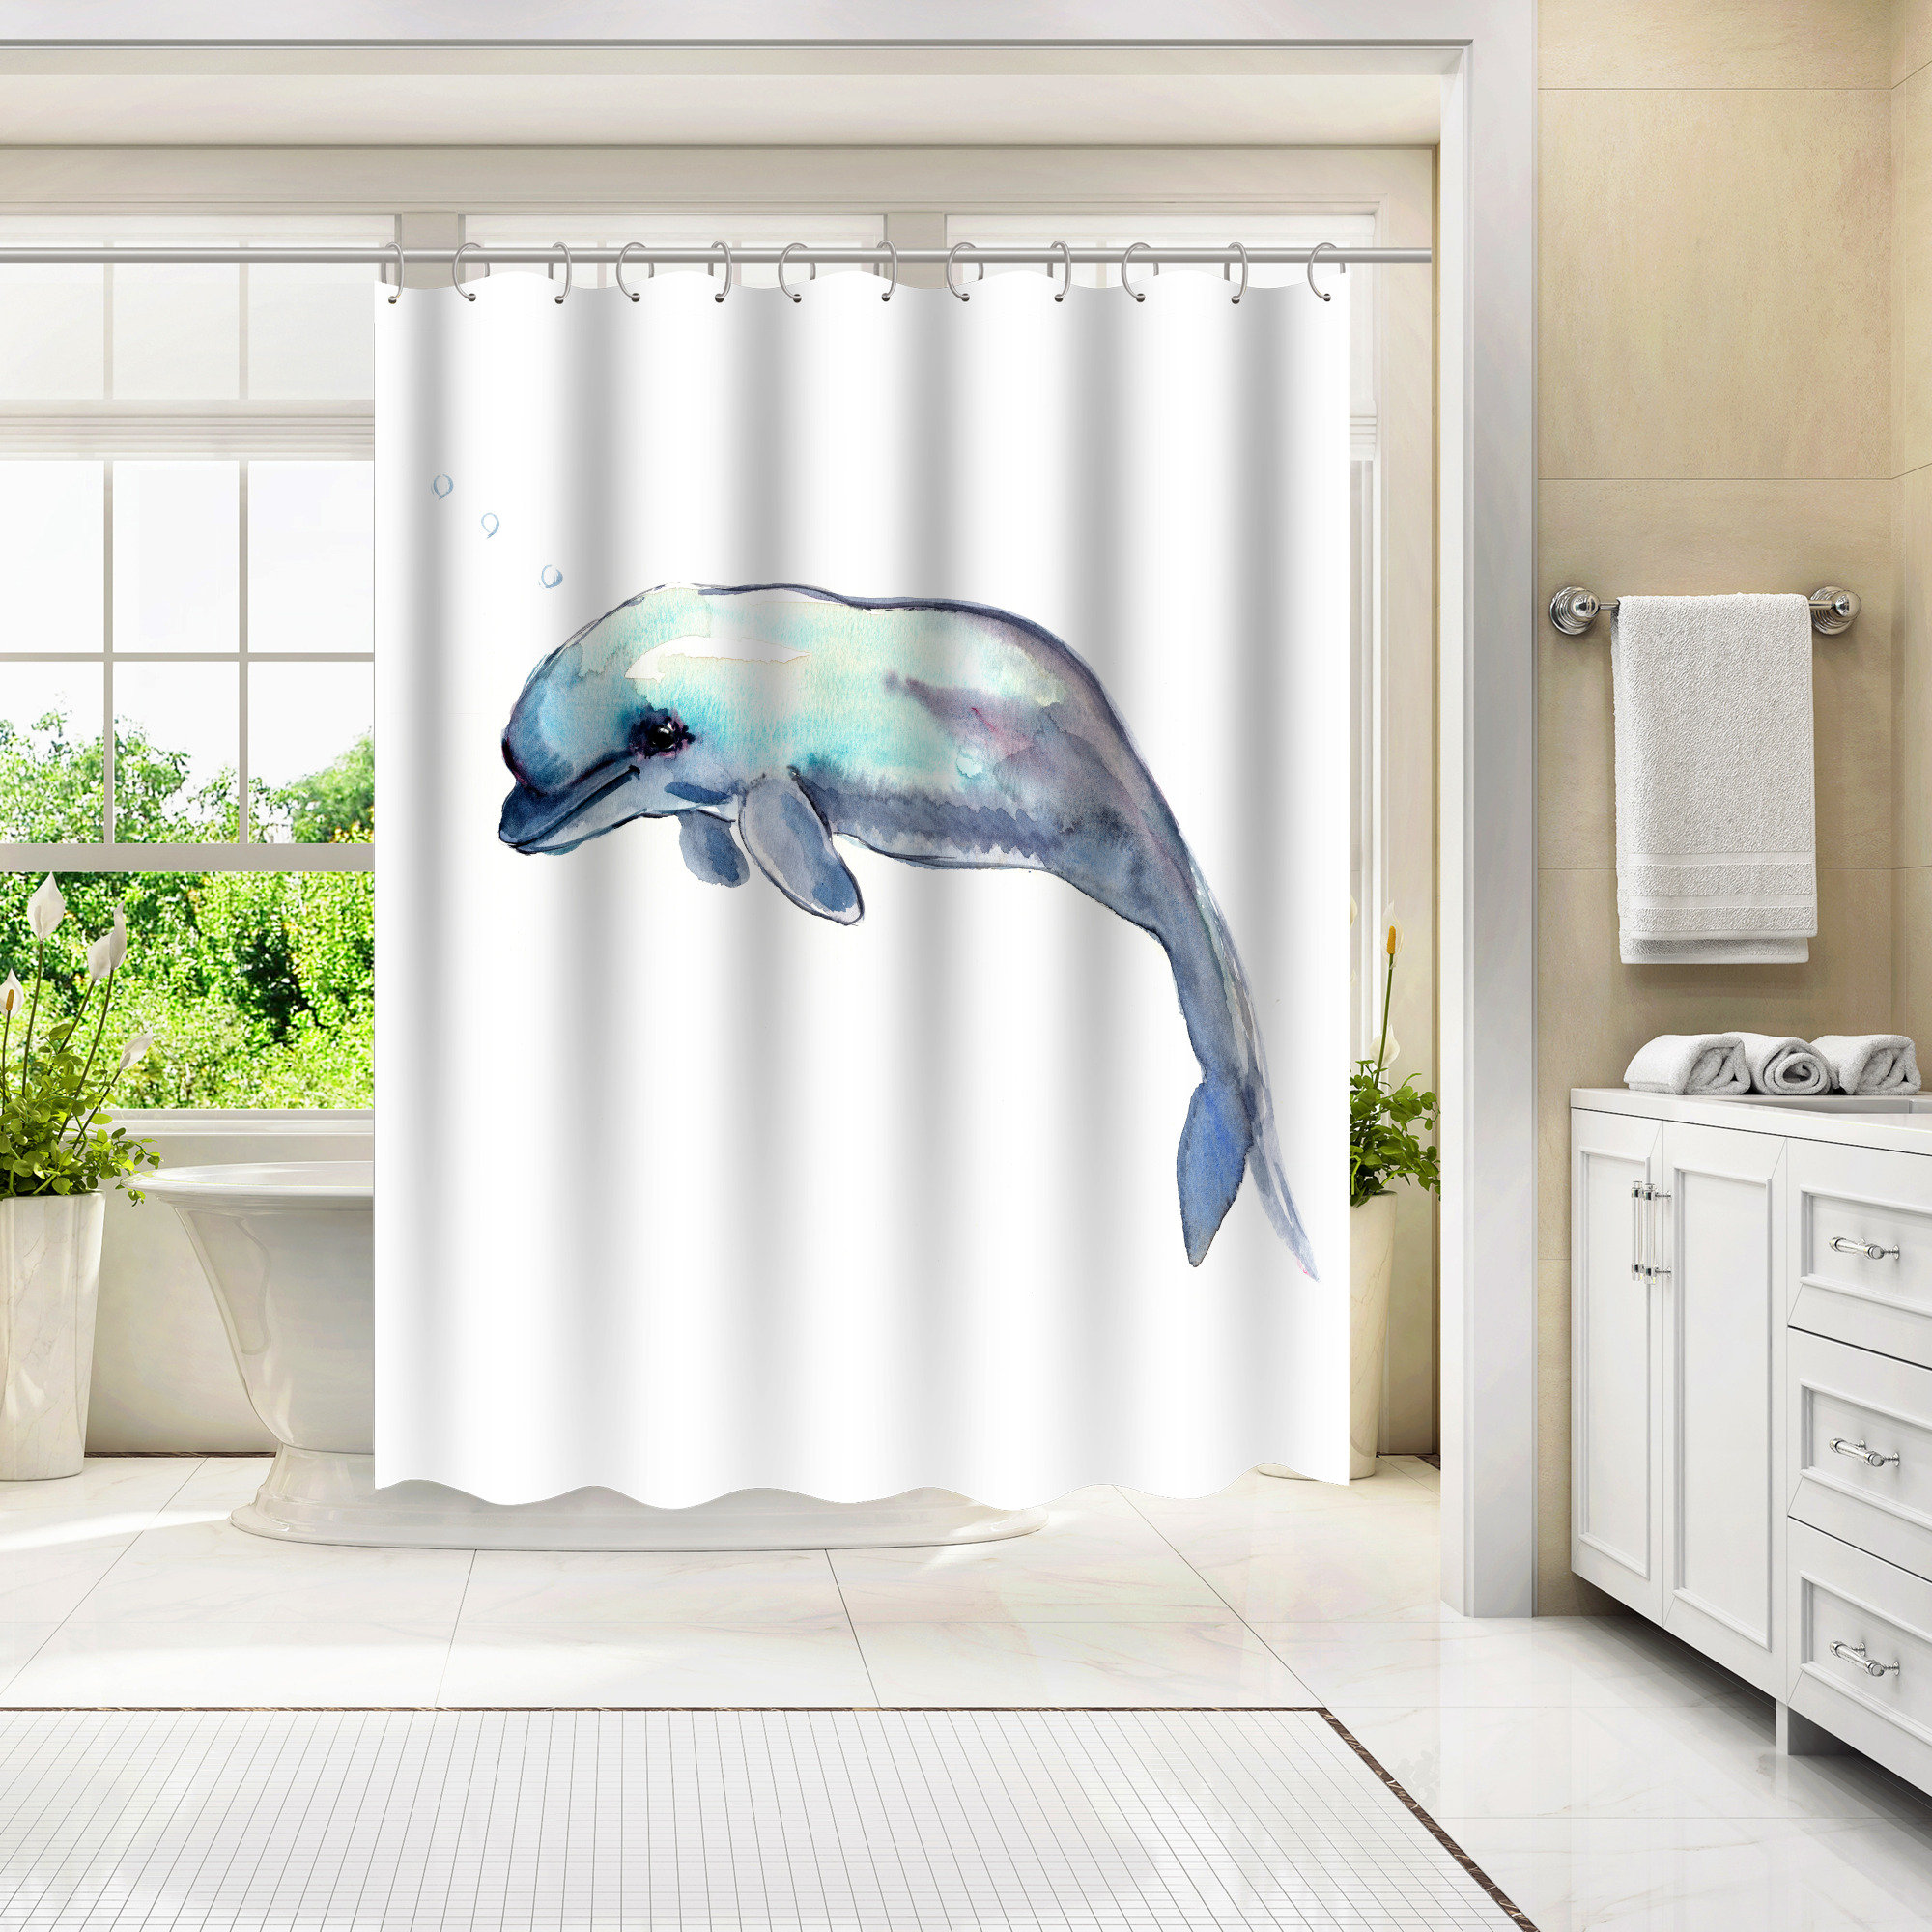 Bless international 71 x 74 Shower Curtain, the Beluga Whale by